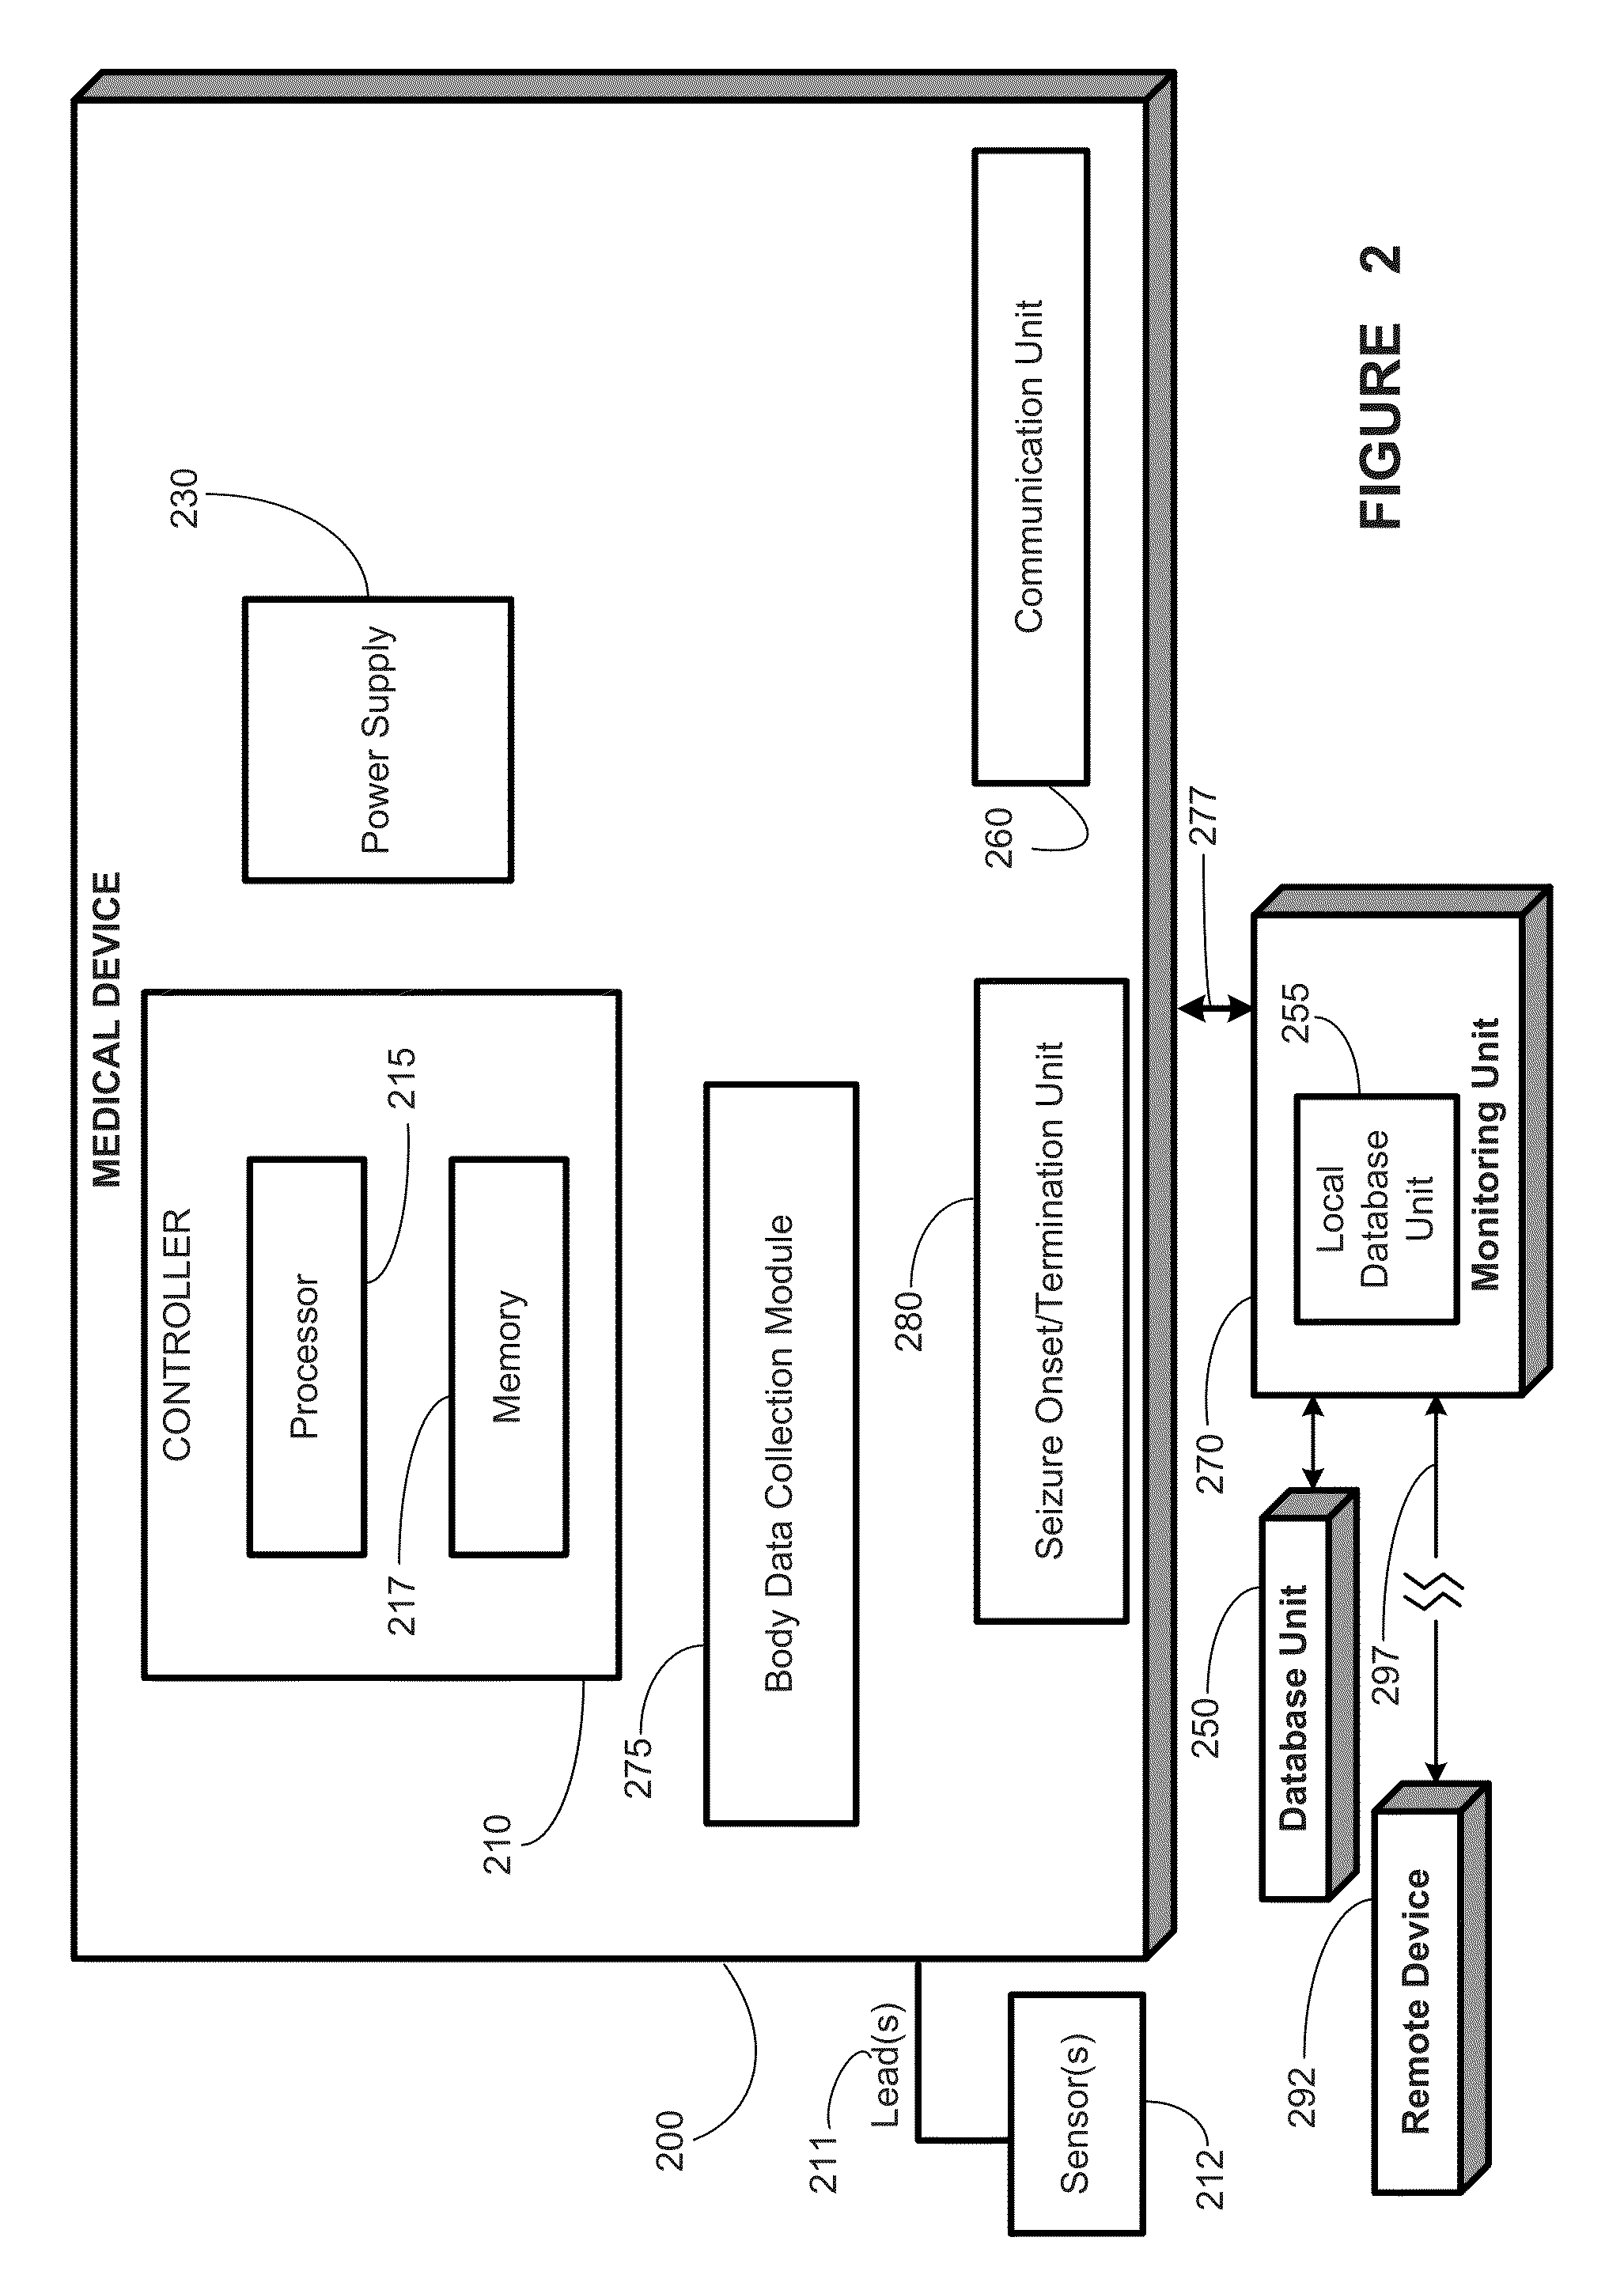 Seizure detection methods, apparatus, and systems using an autoregression algorithm